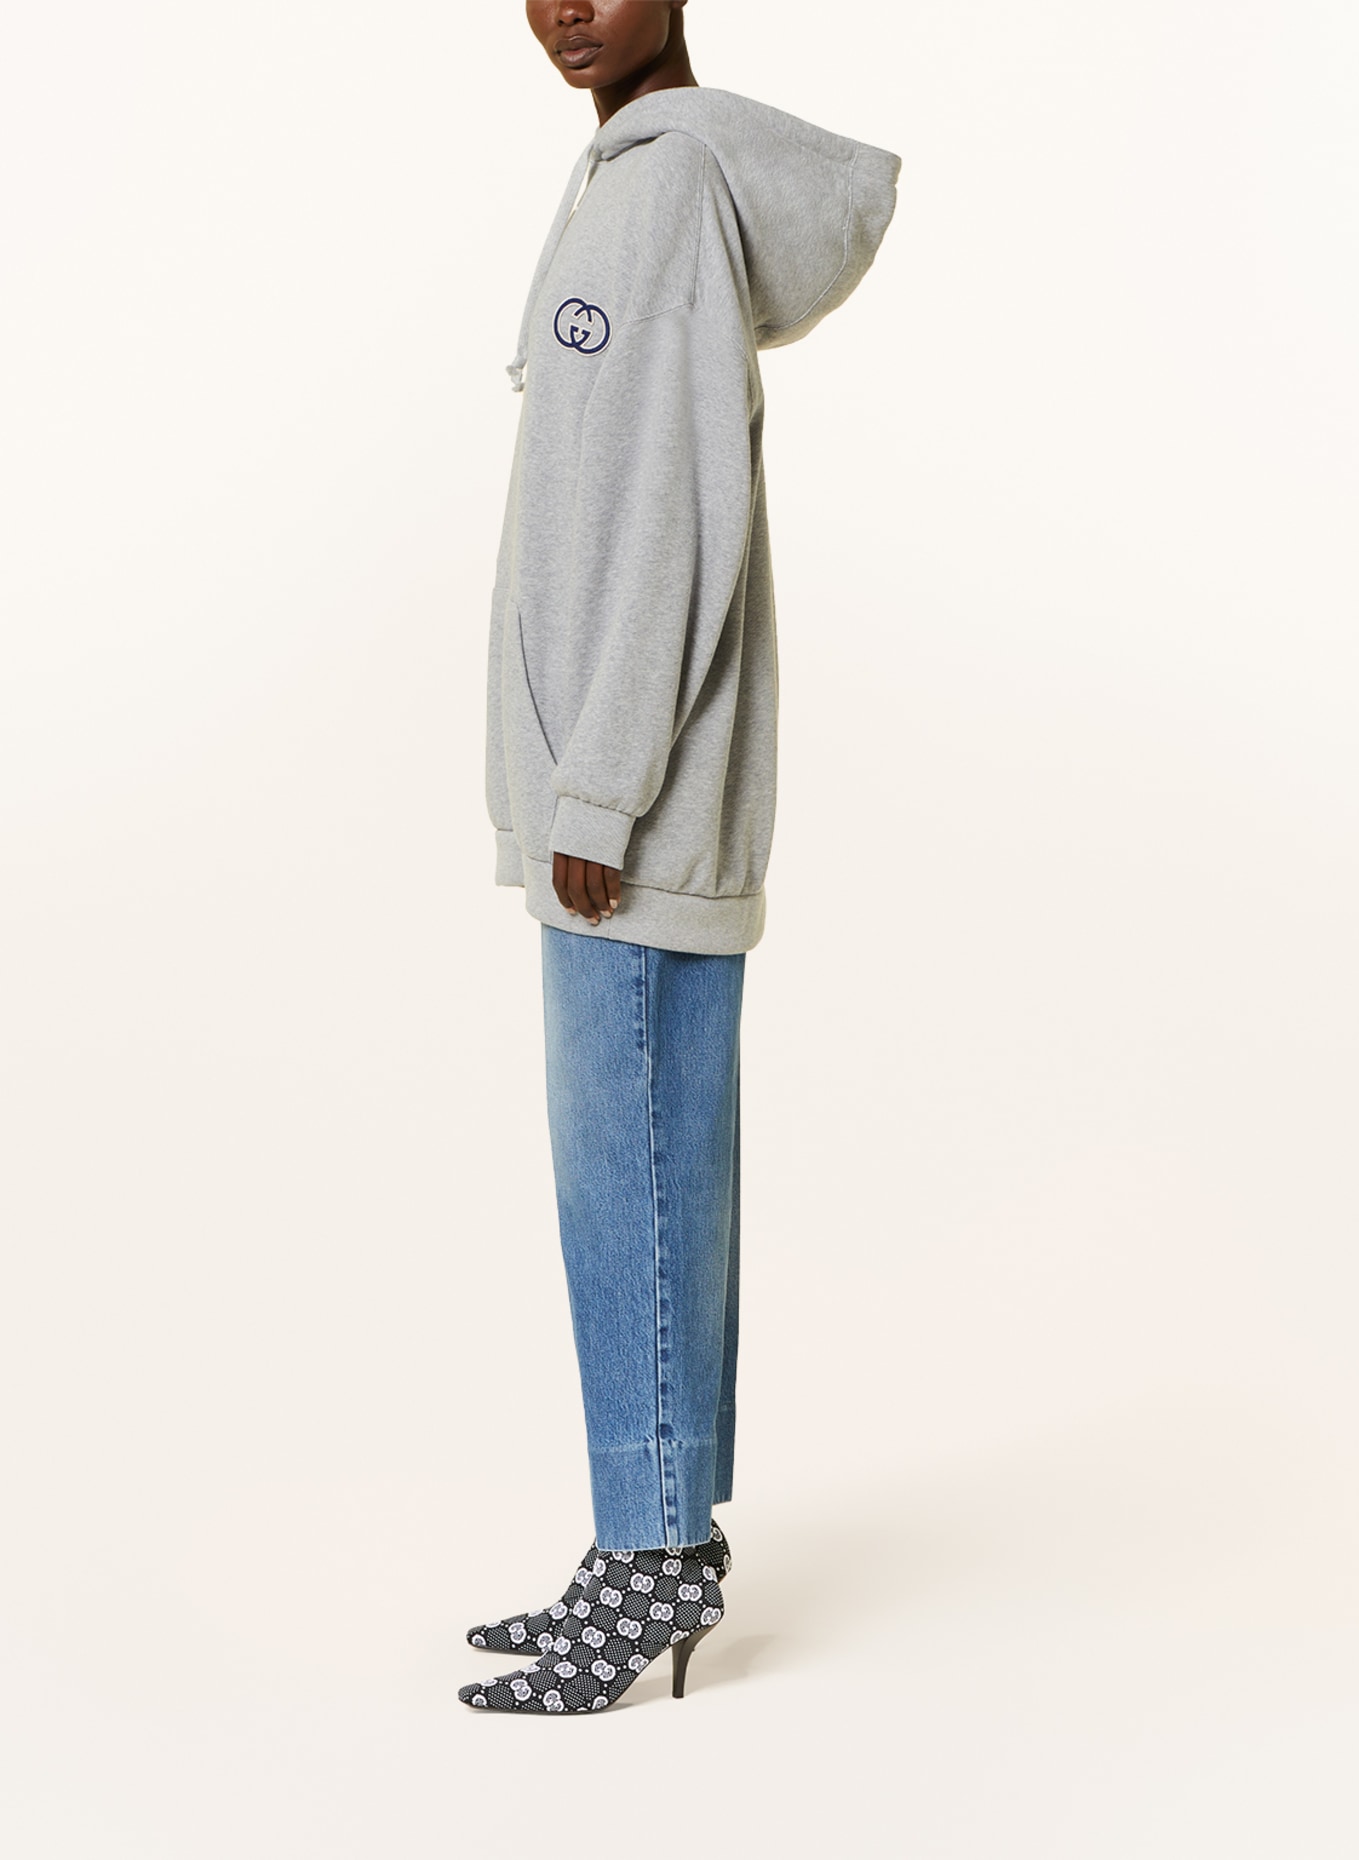 GUCCI Oversized hoodie, Color: 1037 GREY/MIX (Image 4)